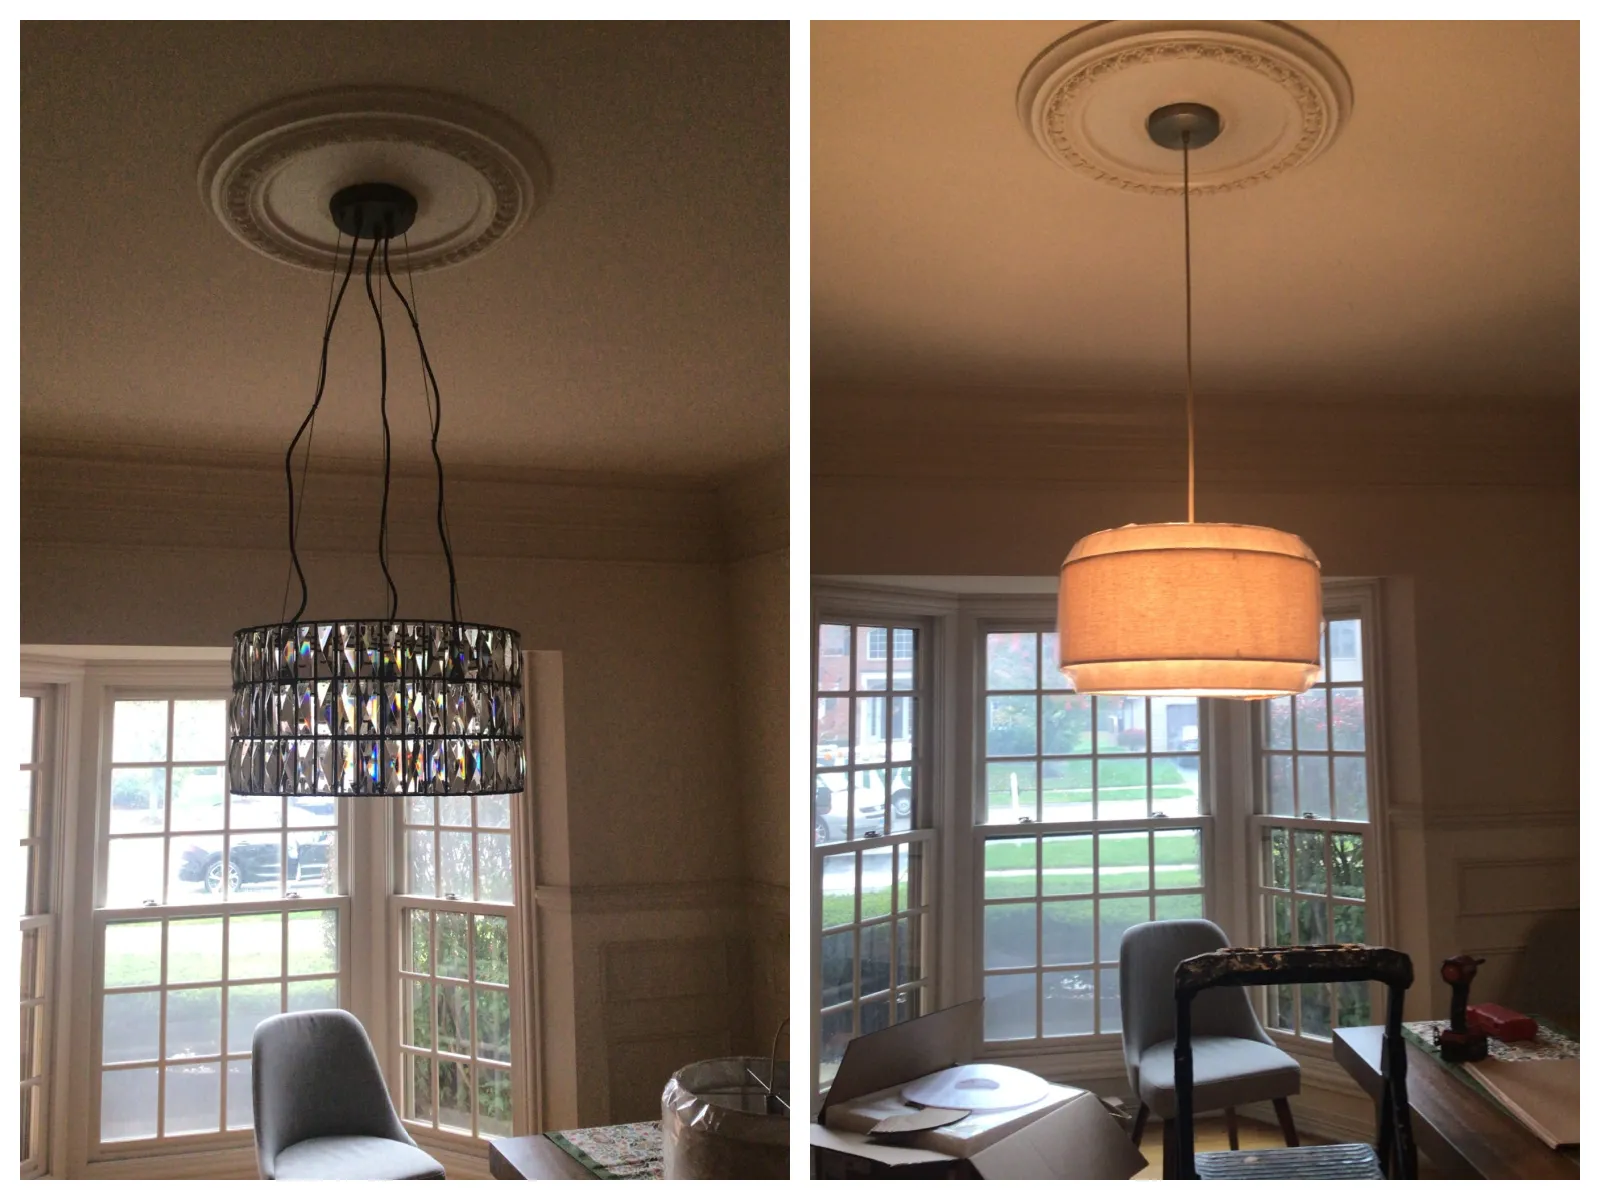  Light fixture replacement in Wheaton home by Mr. Handyman.